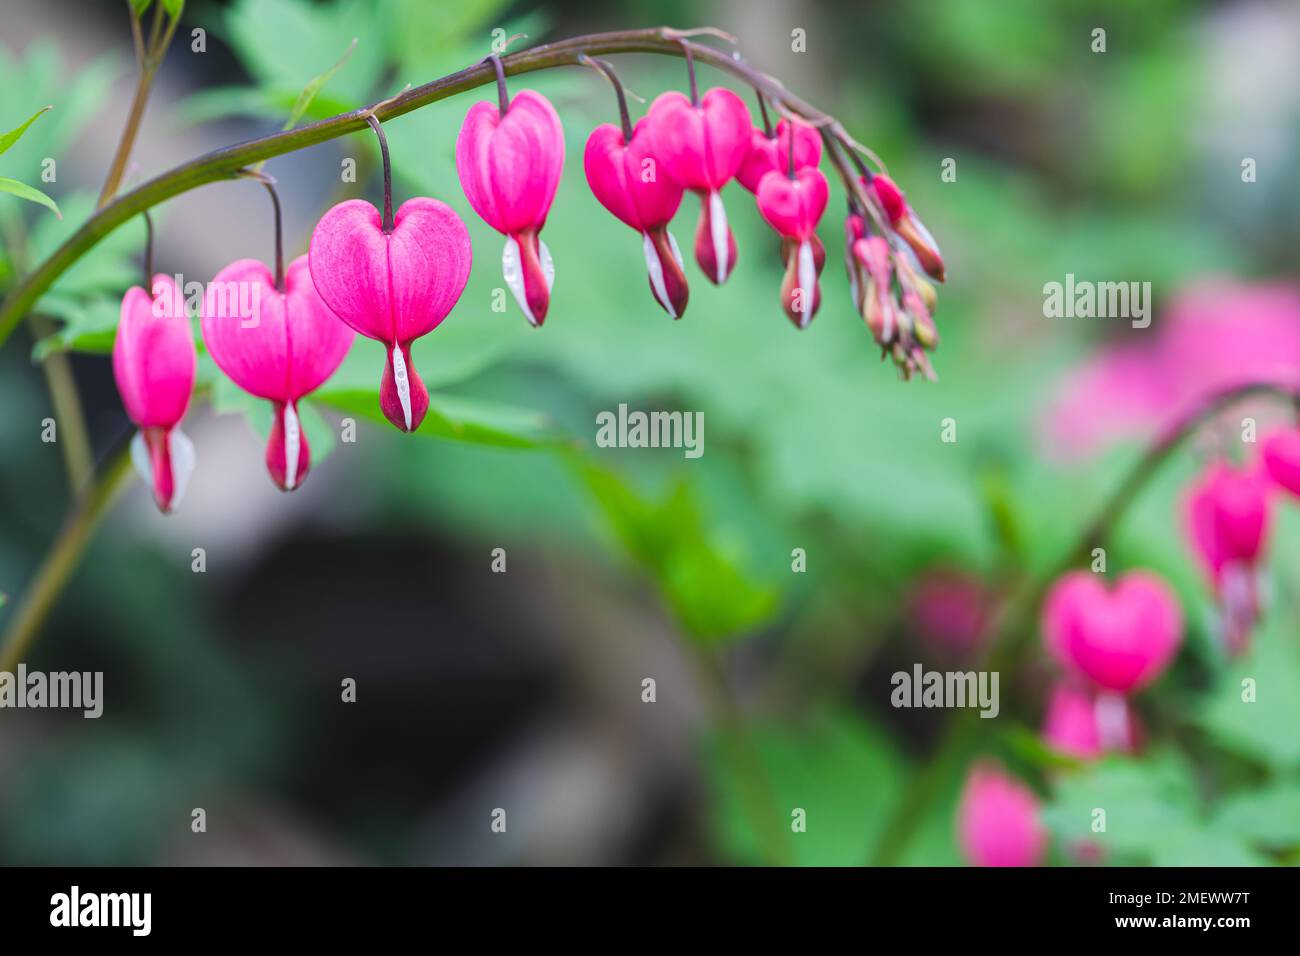 Dicentra spectabilis (Lamprocapnos) - bleeding heart. Asian bleeding-heart. Dicentra formosa blooming in the garden, Nature floral background. Stock Photo